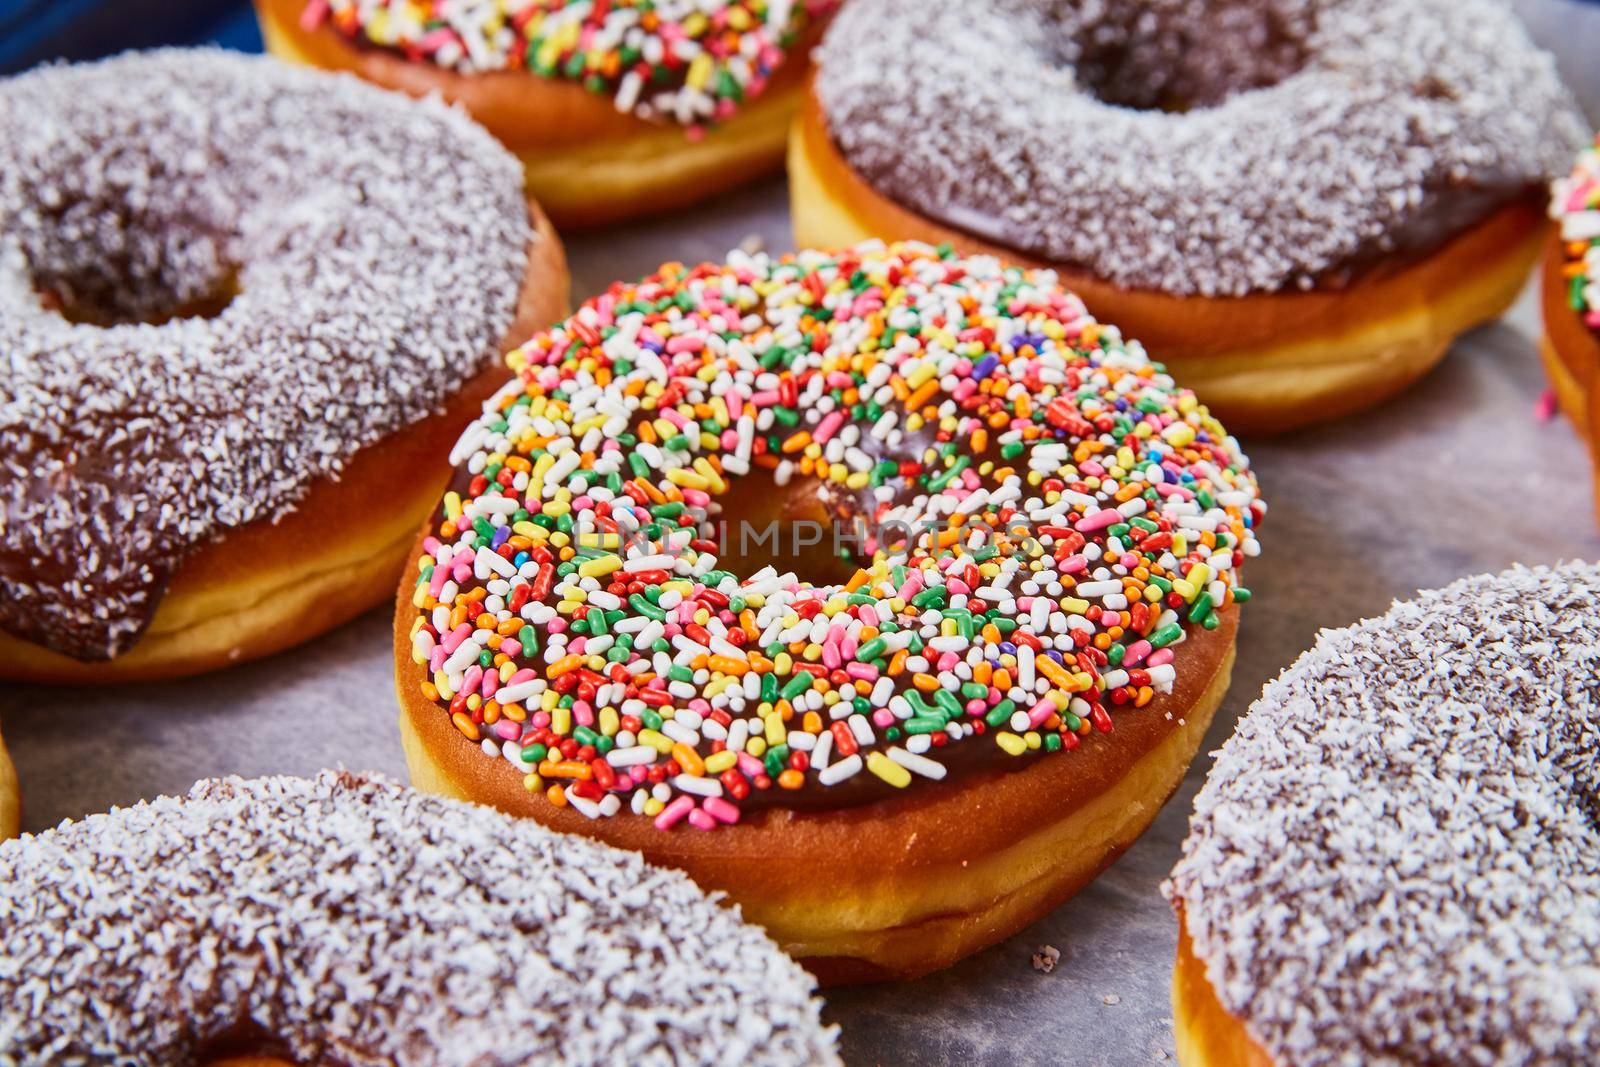 Image of Yummy yeast donut tray with chocolate and sprinkles or coconut